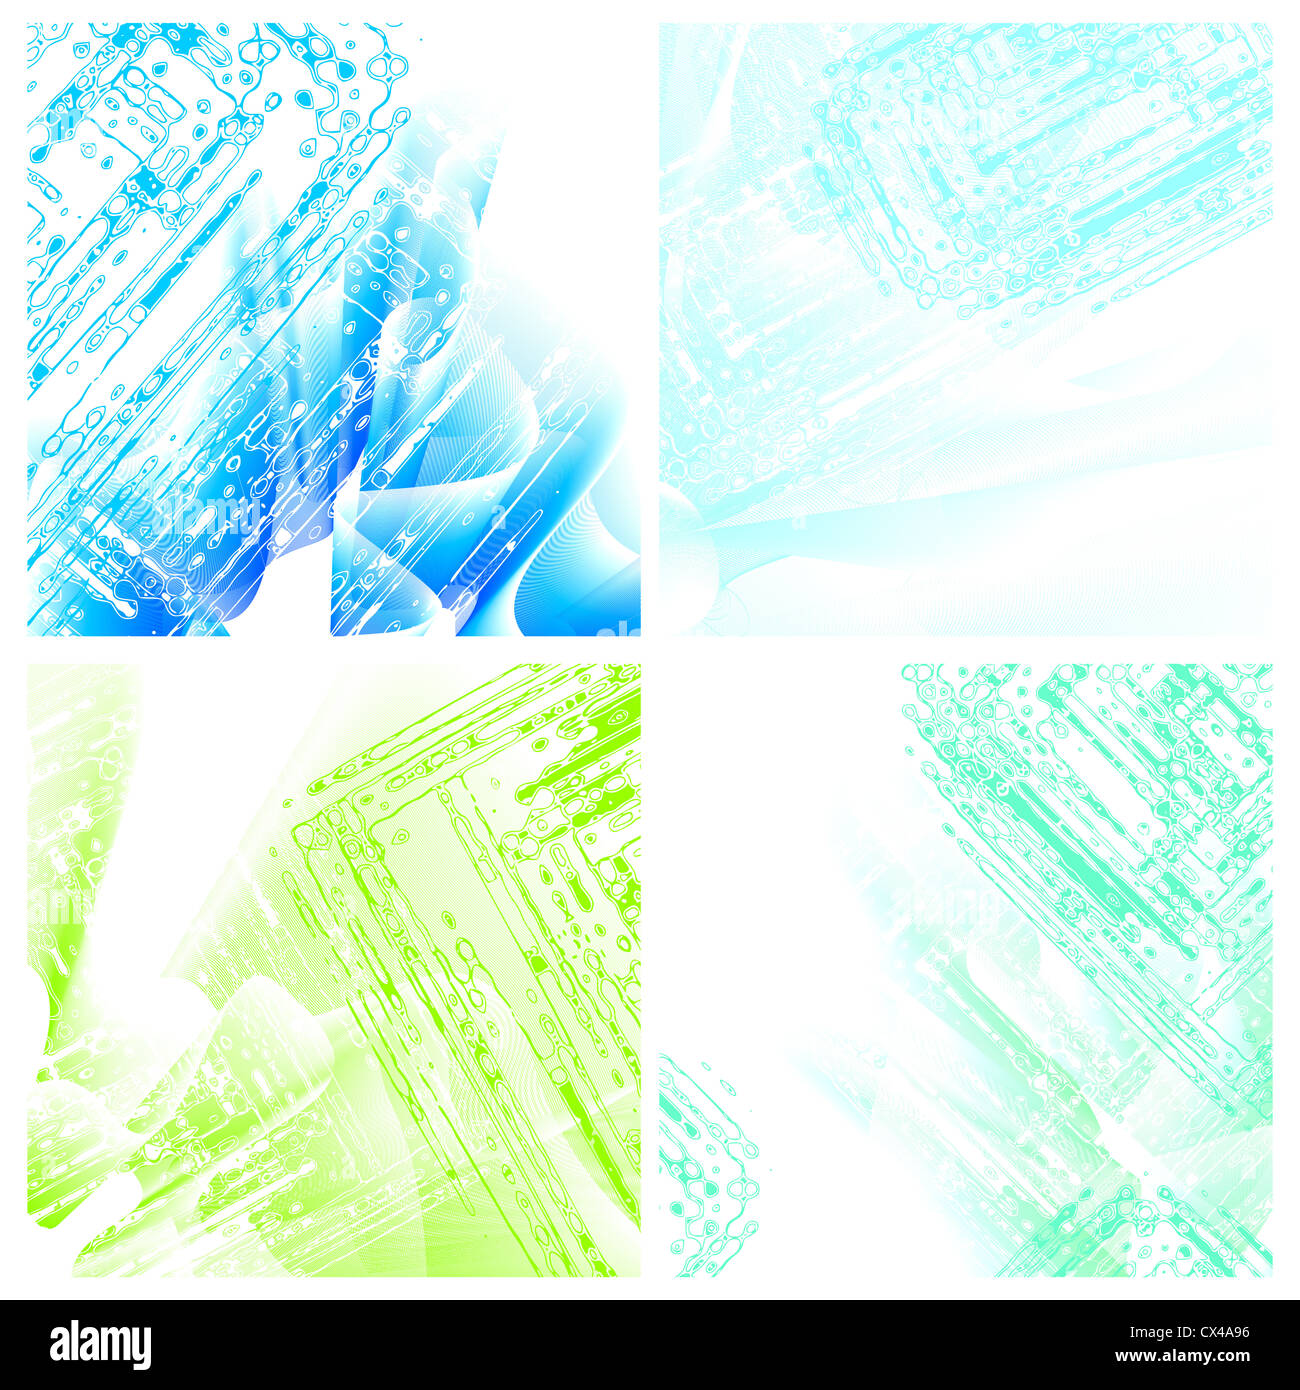 vector set of 4 stylized square backgrounds Stock Photo